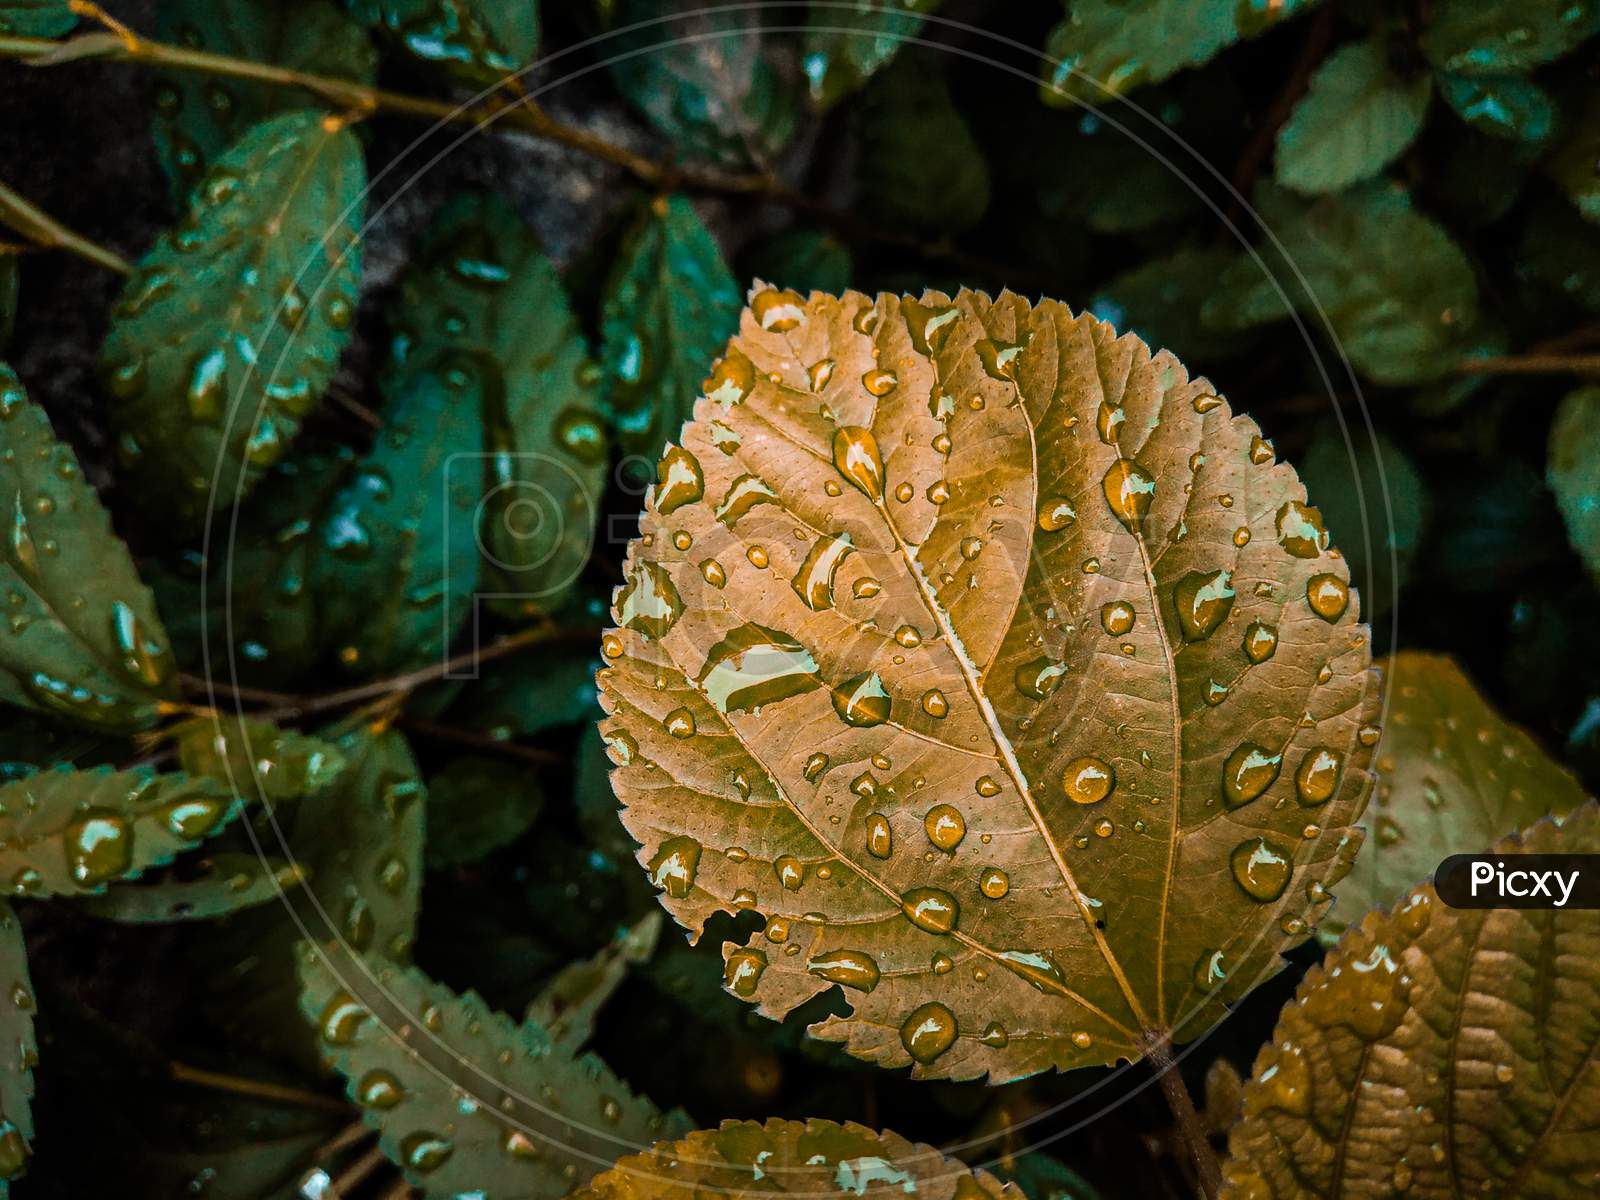 Raindrops on the brown plant leaf